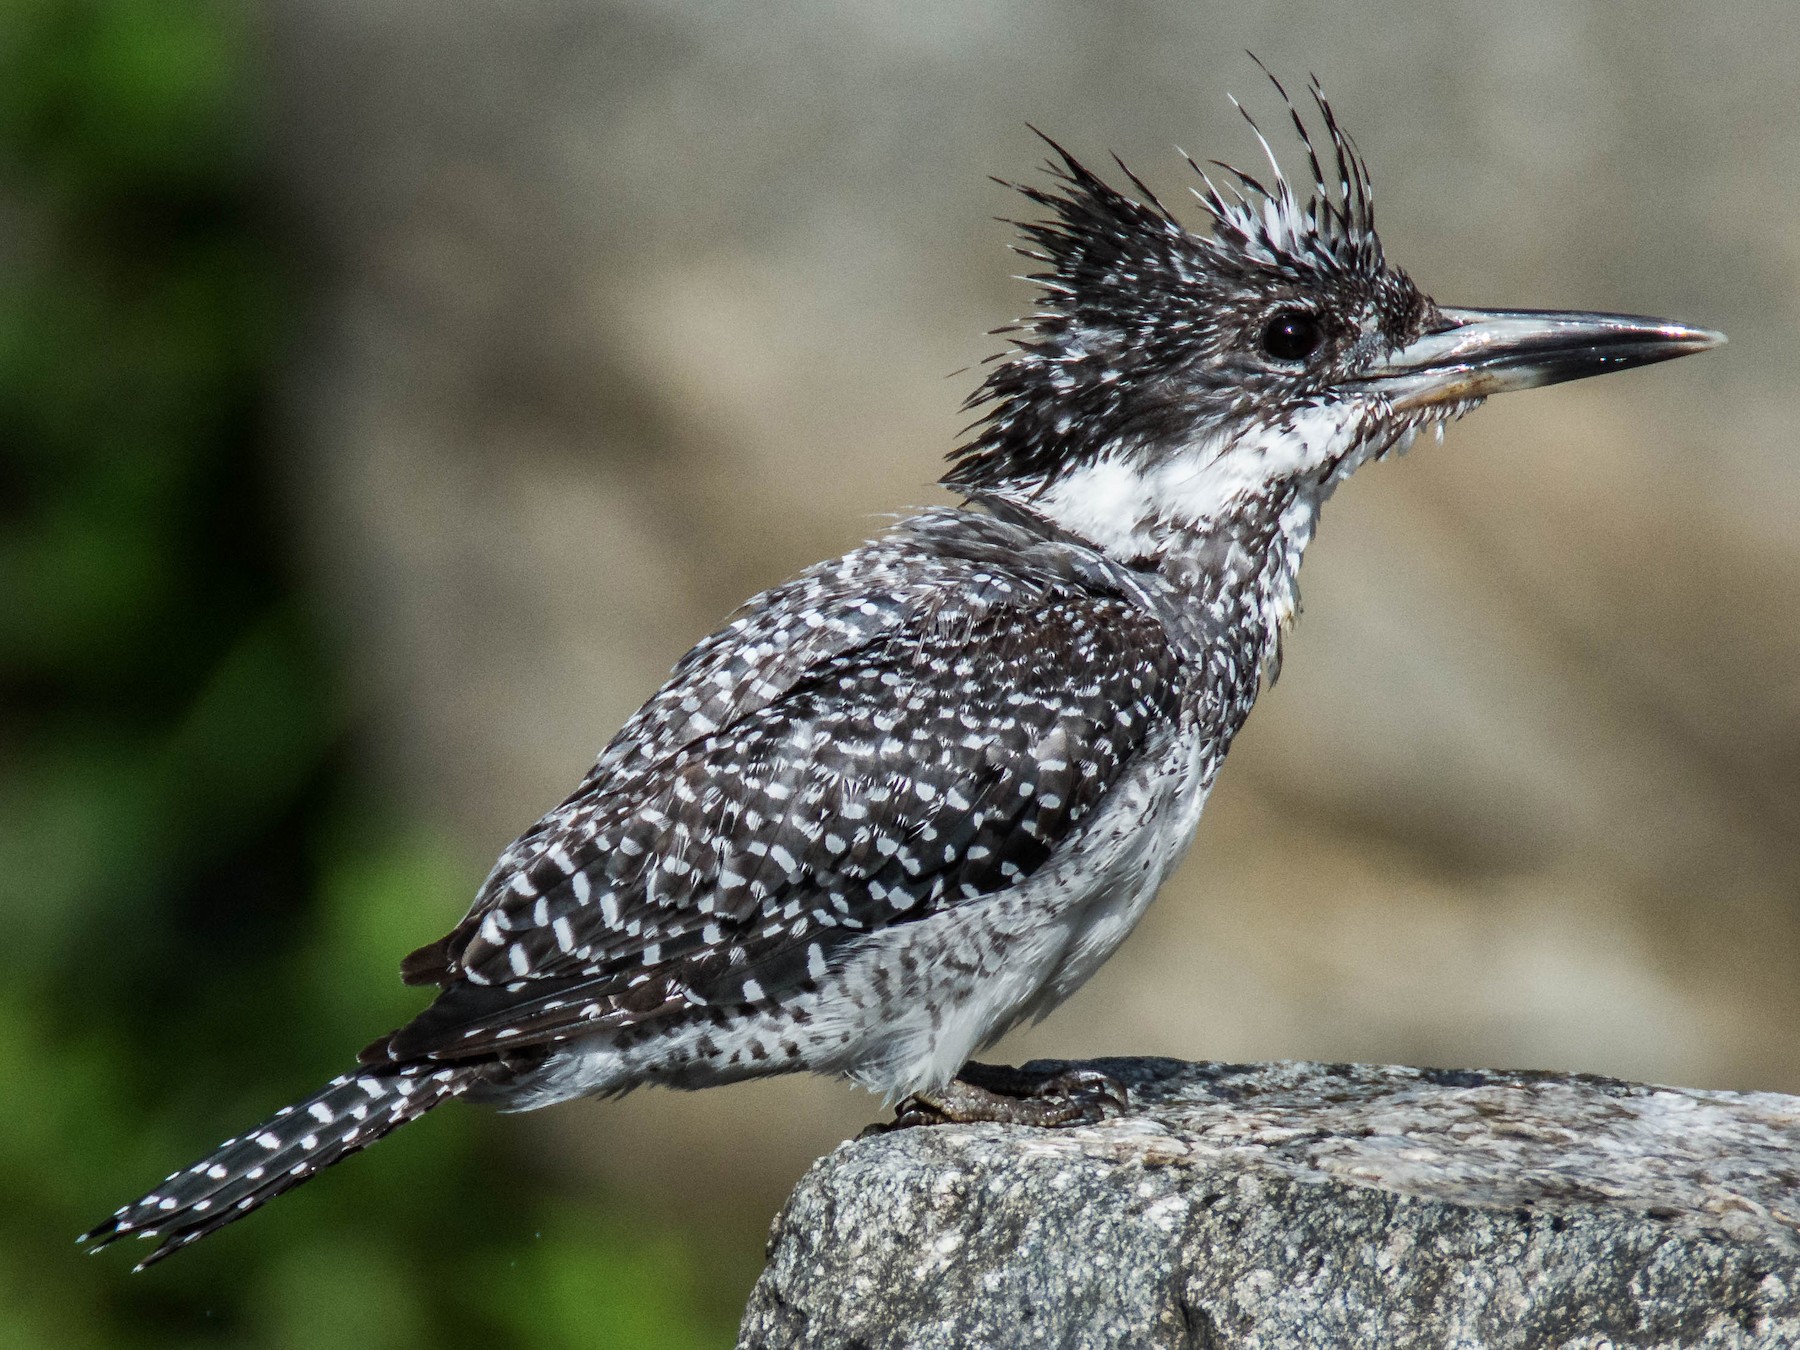 Revealing the Hidden Gem: The Enchanting Beauty of the Crested Kingfisher